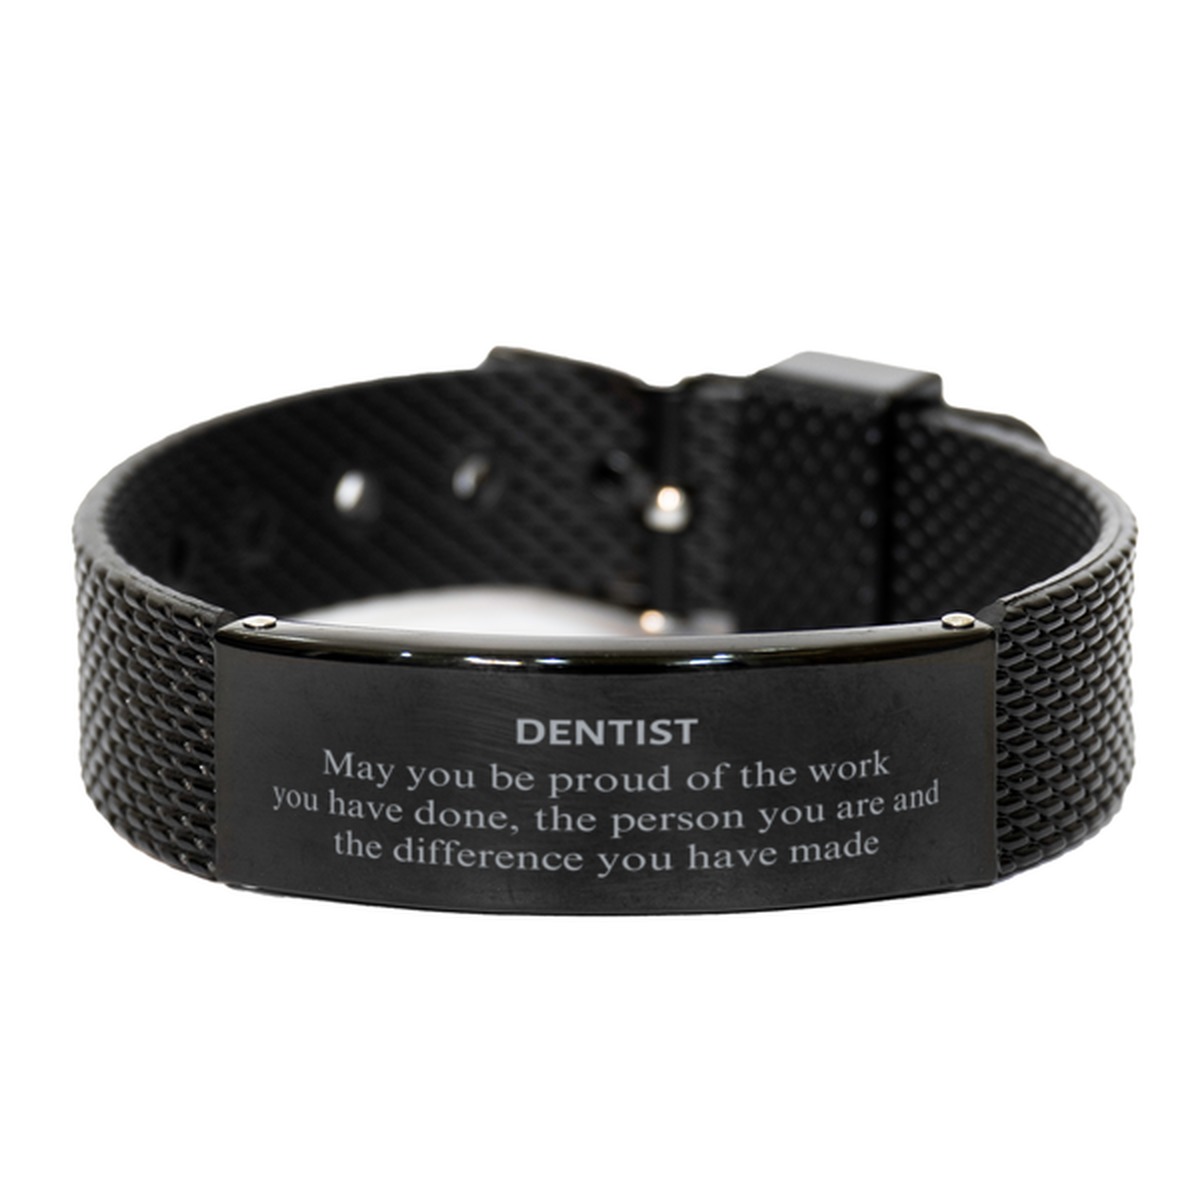 Dentist May you be proud of the work you have done, Retirement Dentist Black Shark Mesh Bracelet for Colleague Appreciation Gifts Amazing for Dentist